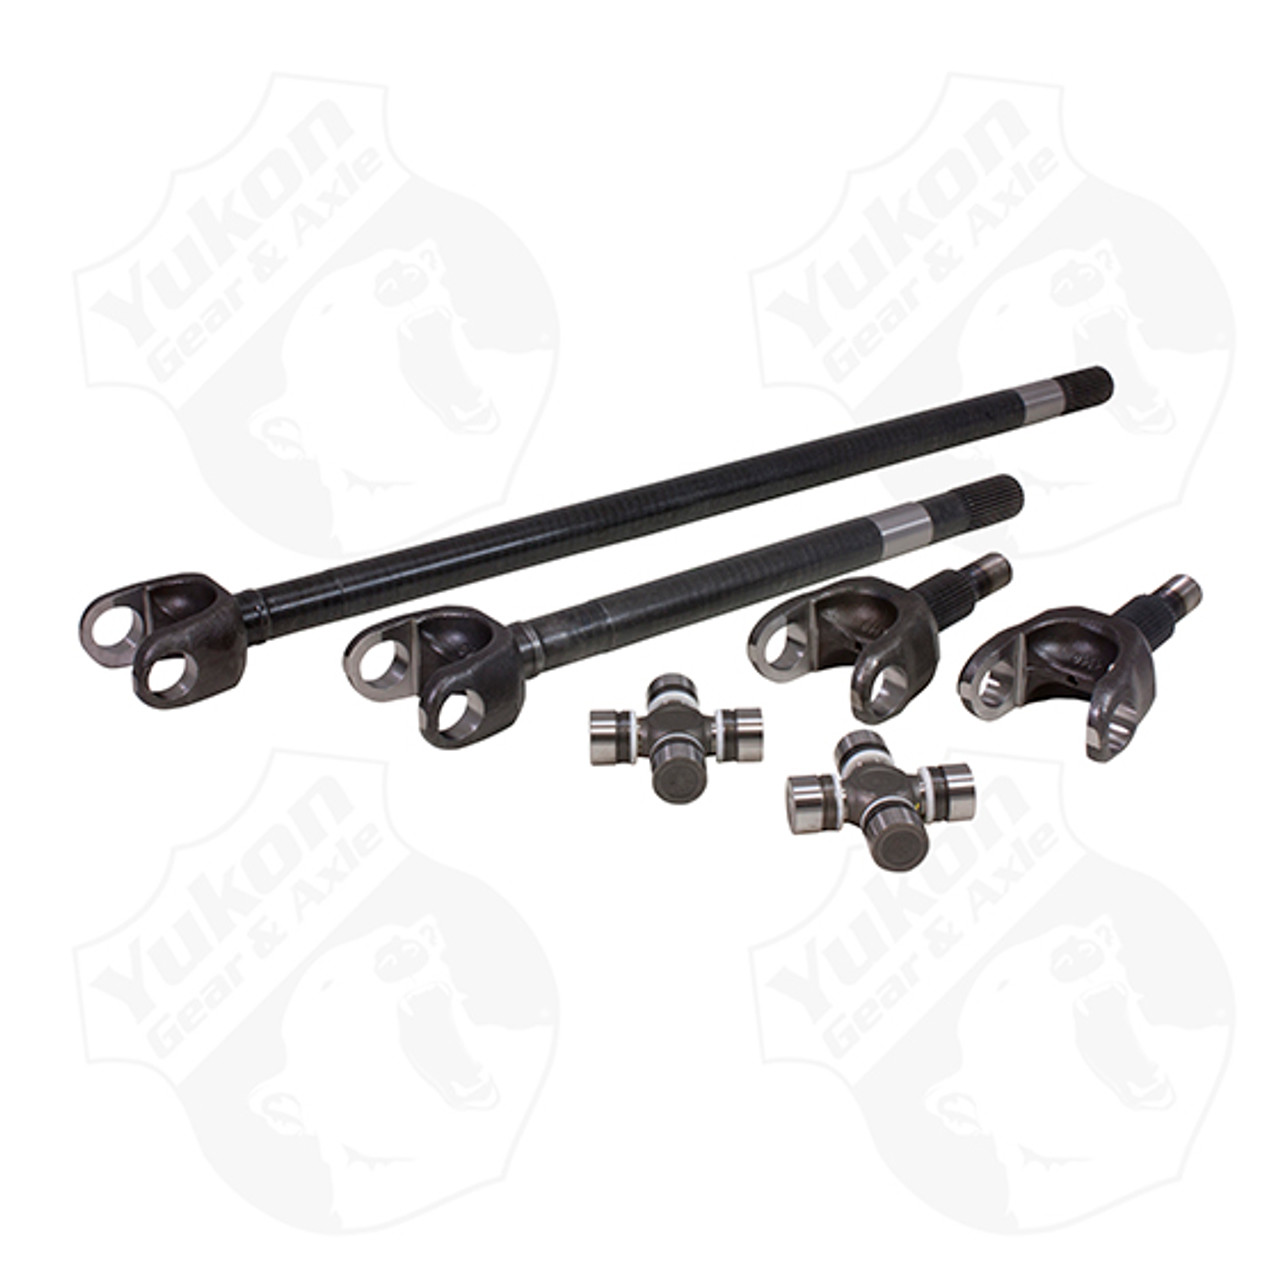 USA Standard 4340 Chrome-Moly replacement axle kit for '77-'91 GM Dana 60 front, 35 spline